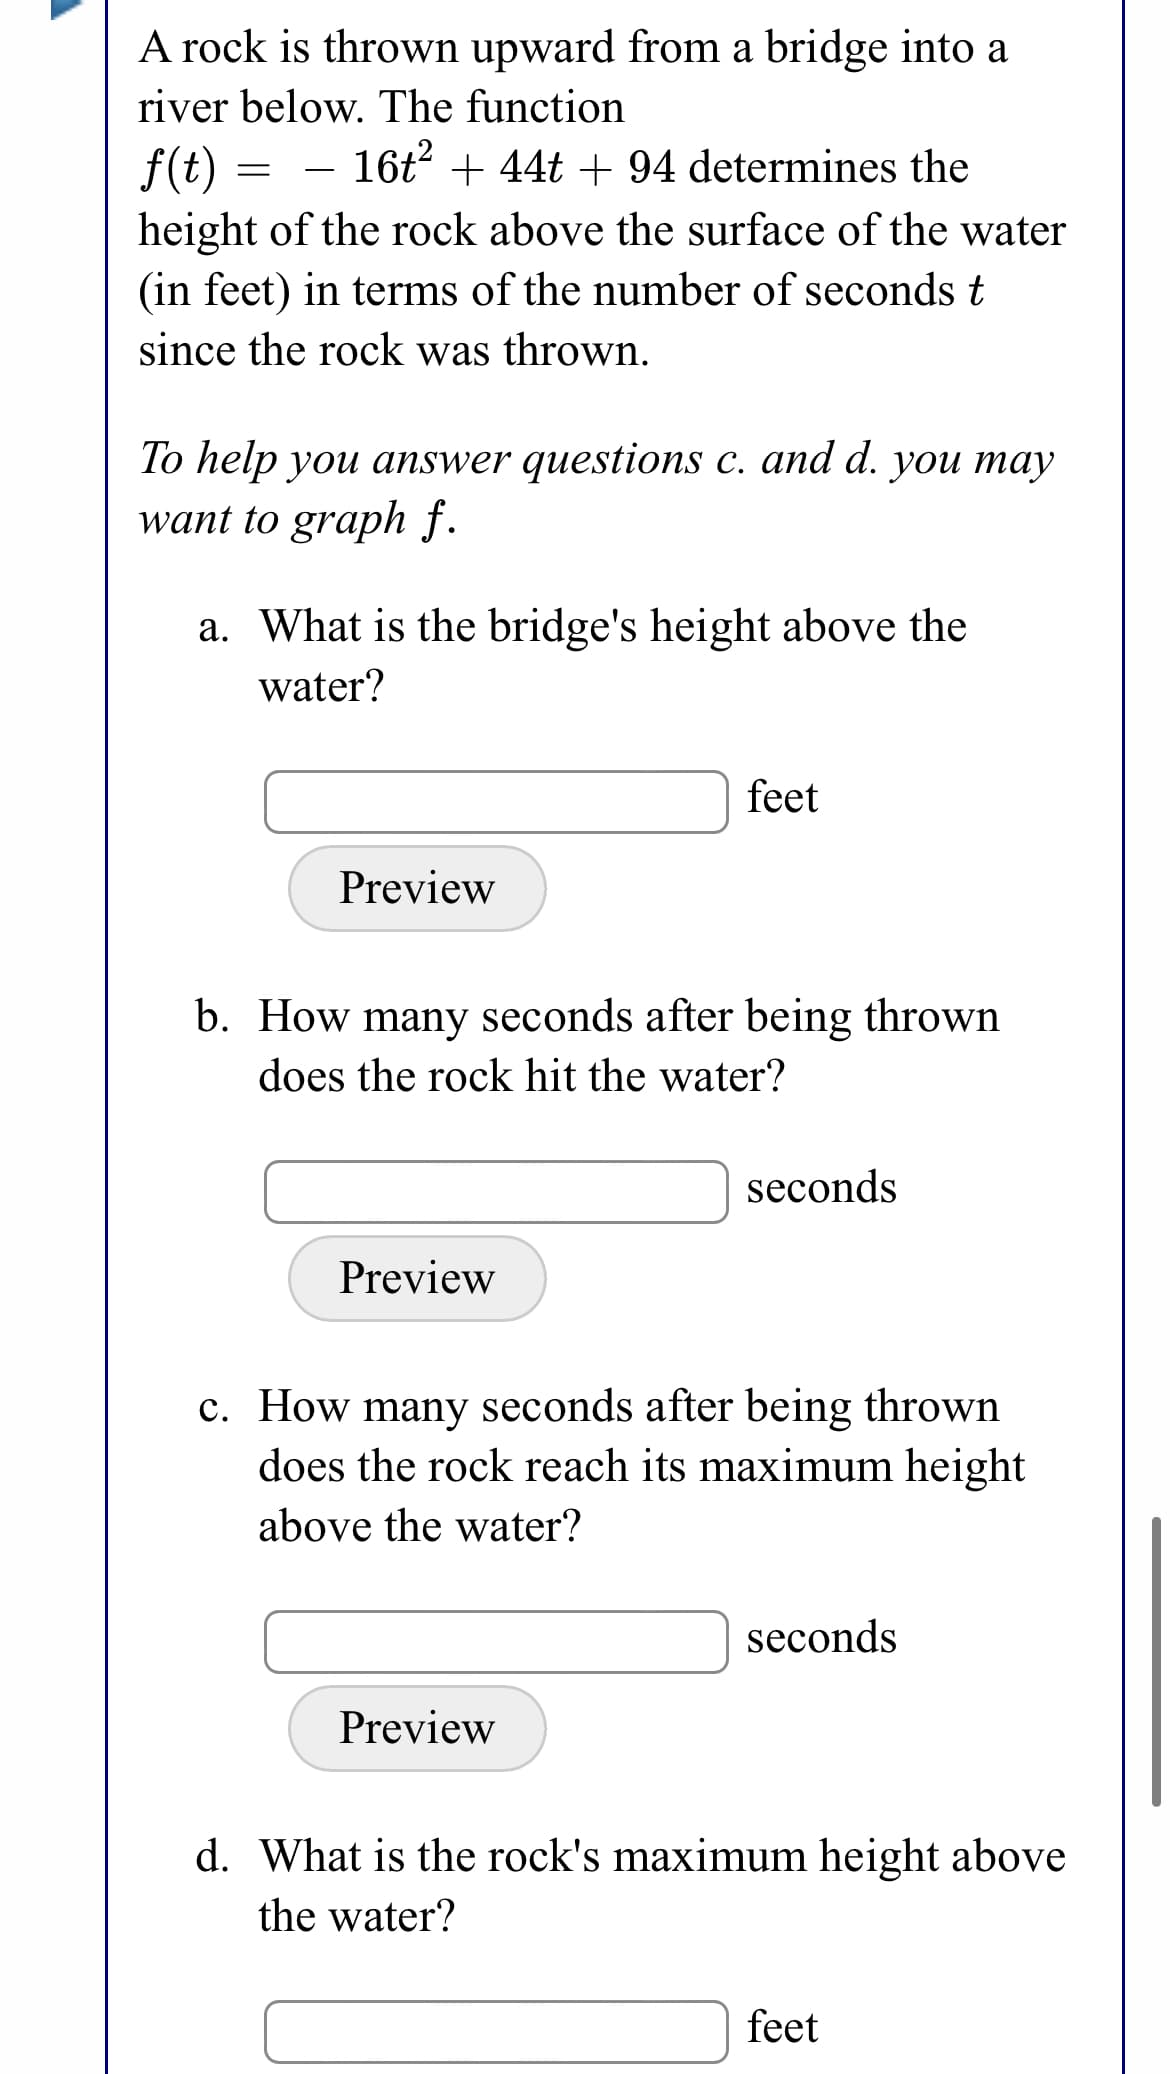 A rock is thrown upward from a bridge into a
river below. The function
f(t)
16t + 44t + 94 determines the
height of the rock above the surface of the water
(in feet) in terms of the number of secondst
since the rock was thrown.
To help you answer questions c. and d. you may
want to graph f.
a. What is the bridge's height above the
water?
feet
Preview
b. How many seconds after being thrown
does the rock hit the water?
seconds
Preview
c. How many seconds after being thrown
does the rock reach its maximum height
above the water?
seconds
Preview
d. What is the rock's maximum height above
the water?
feet
